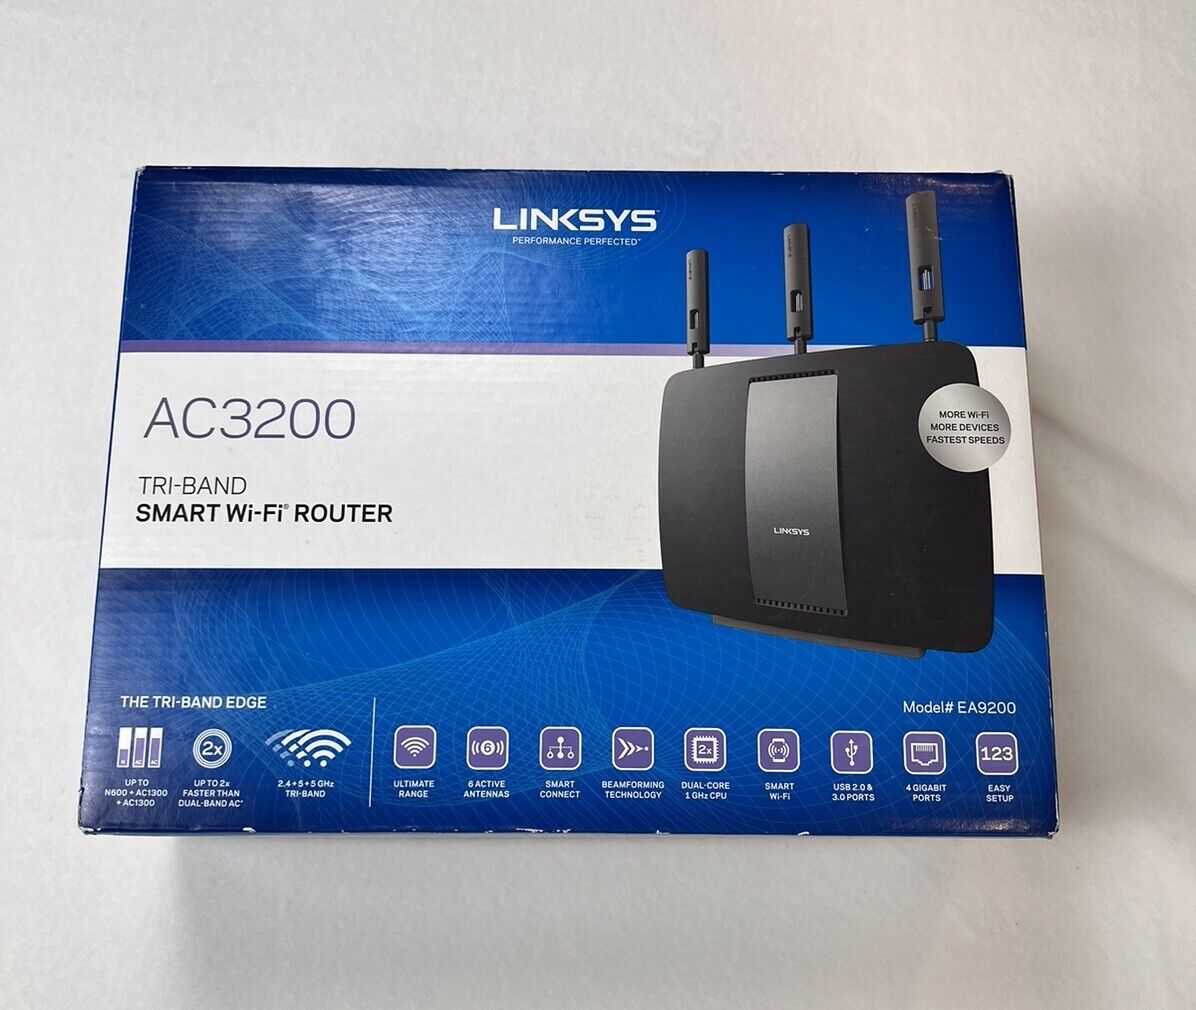 Linksys AC3200 EA9200 Tri-Band Smart Wi-Fi Wireless Router